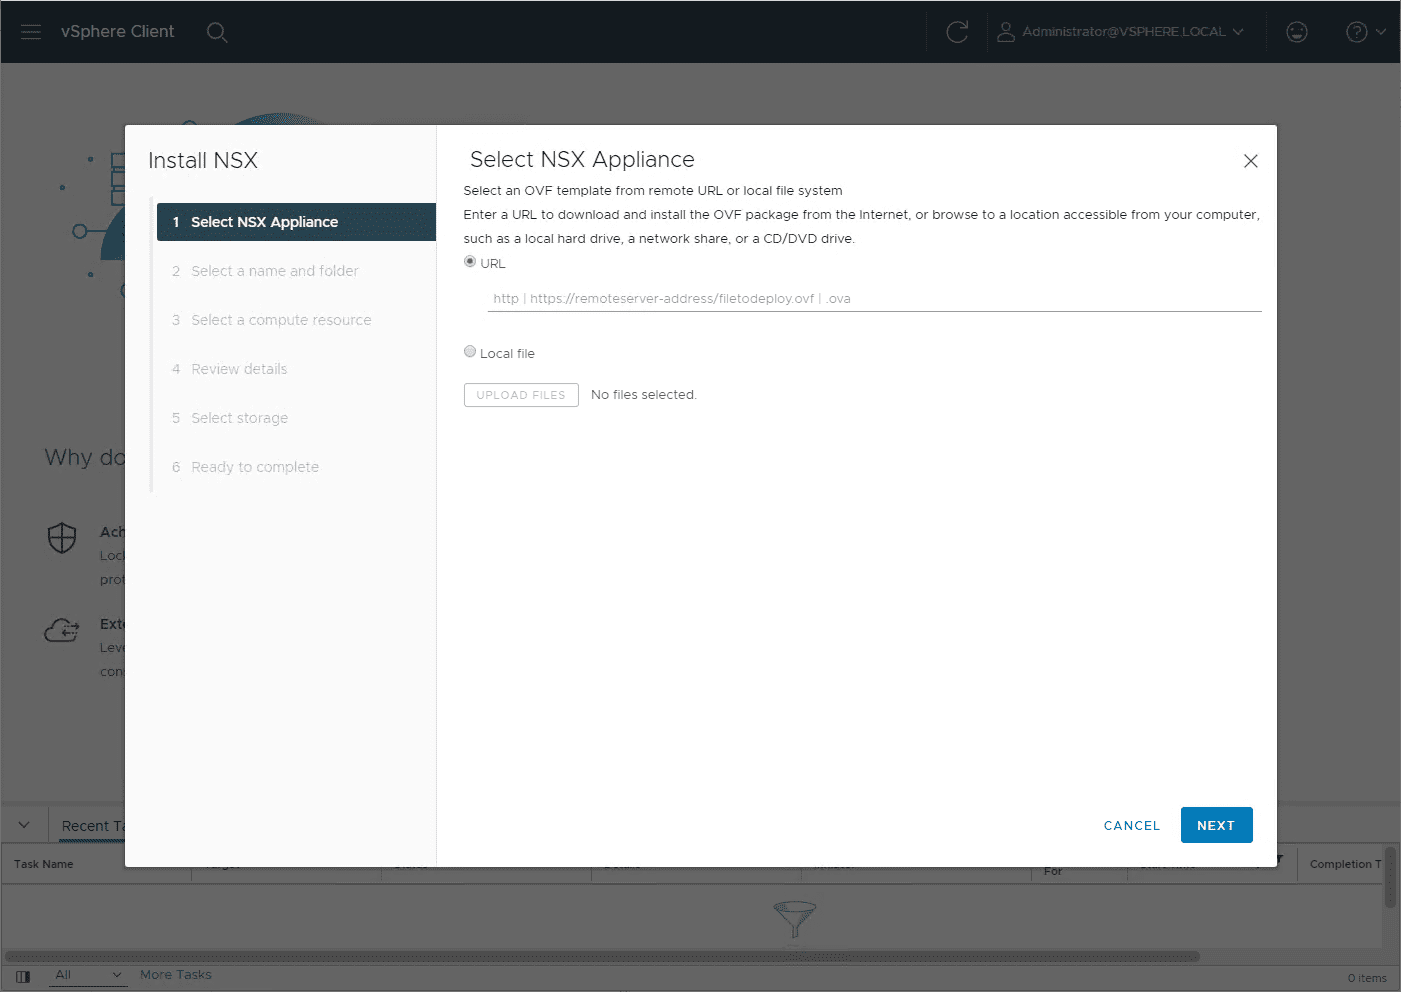 Select the NSX appliance installation